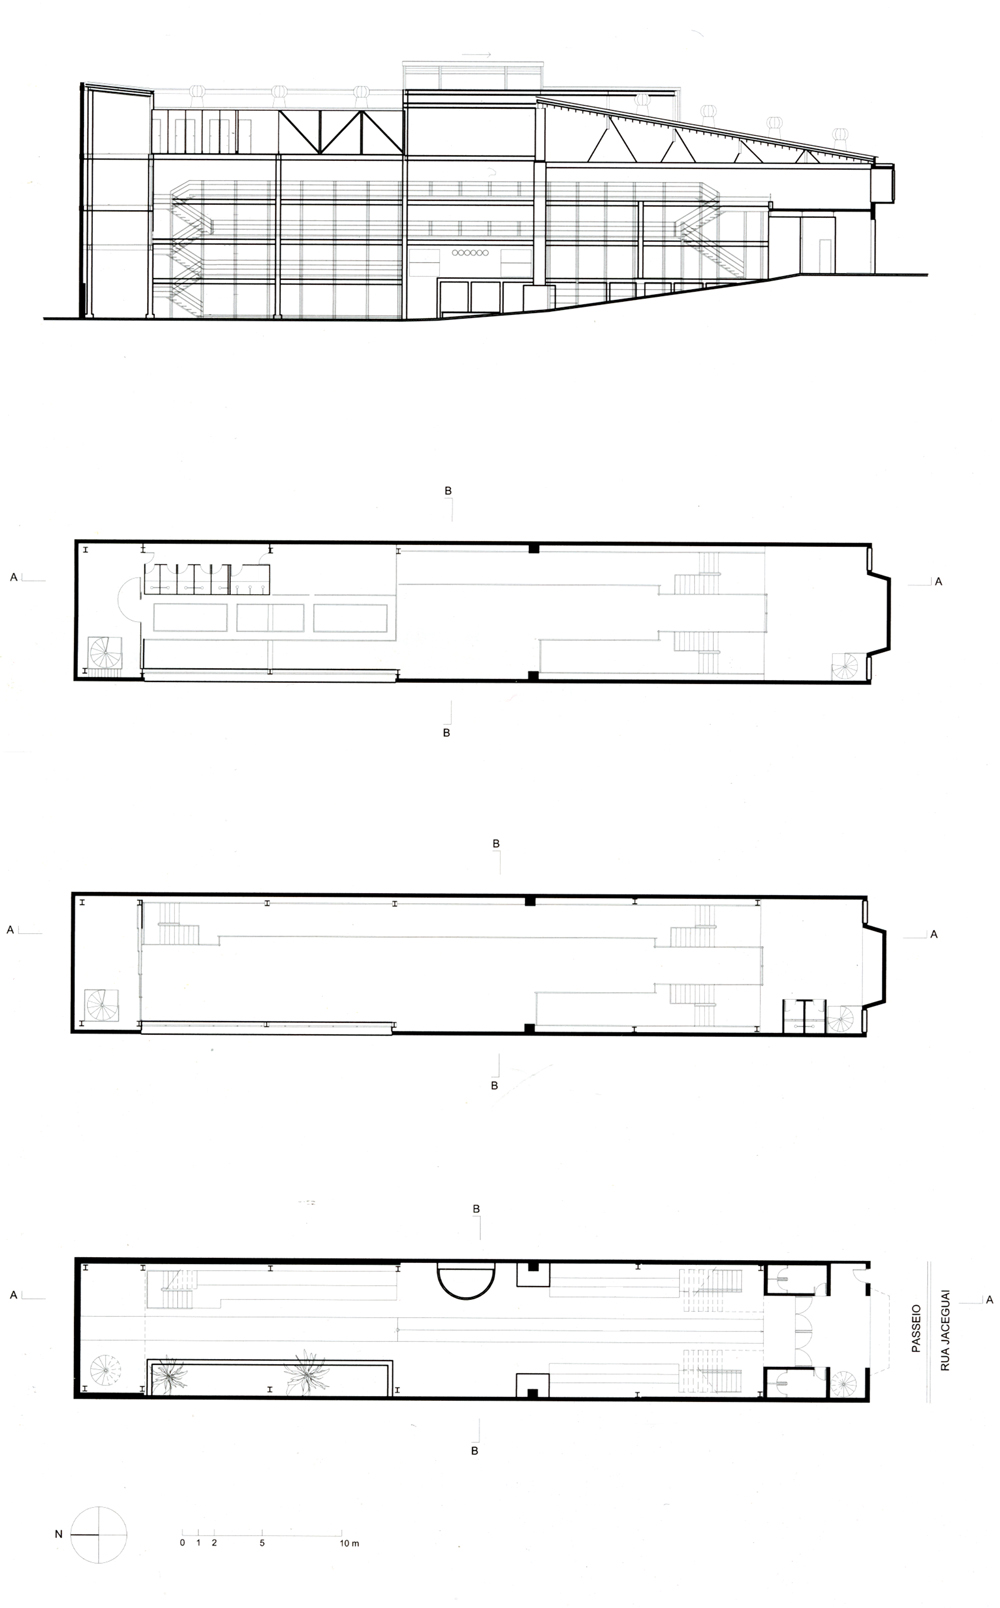 Floor Plans and section of Teatro Oficina / Lina Bo Bardi